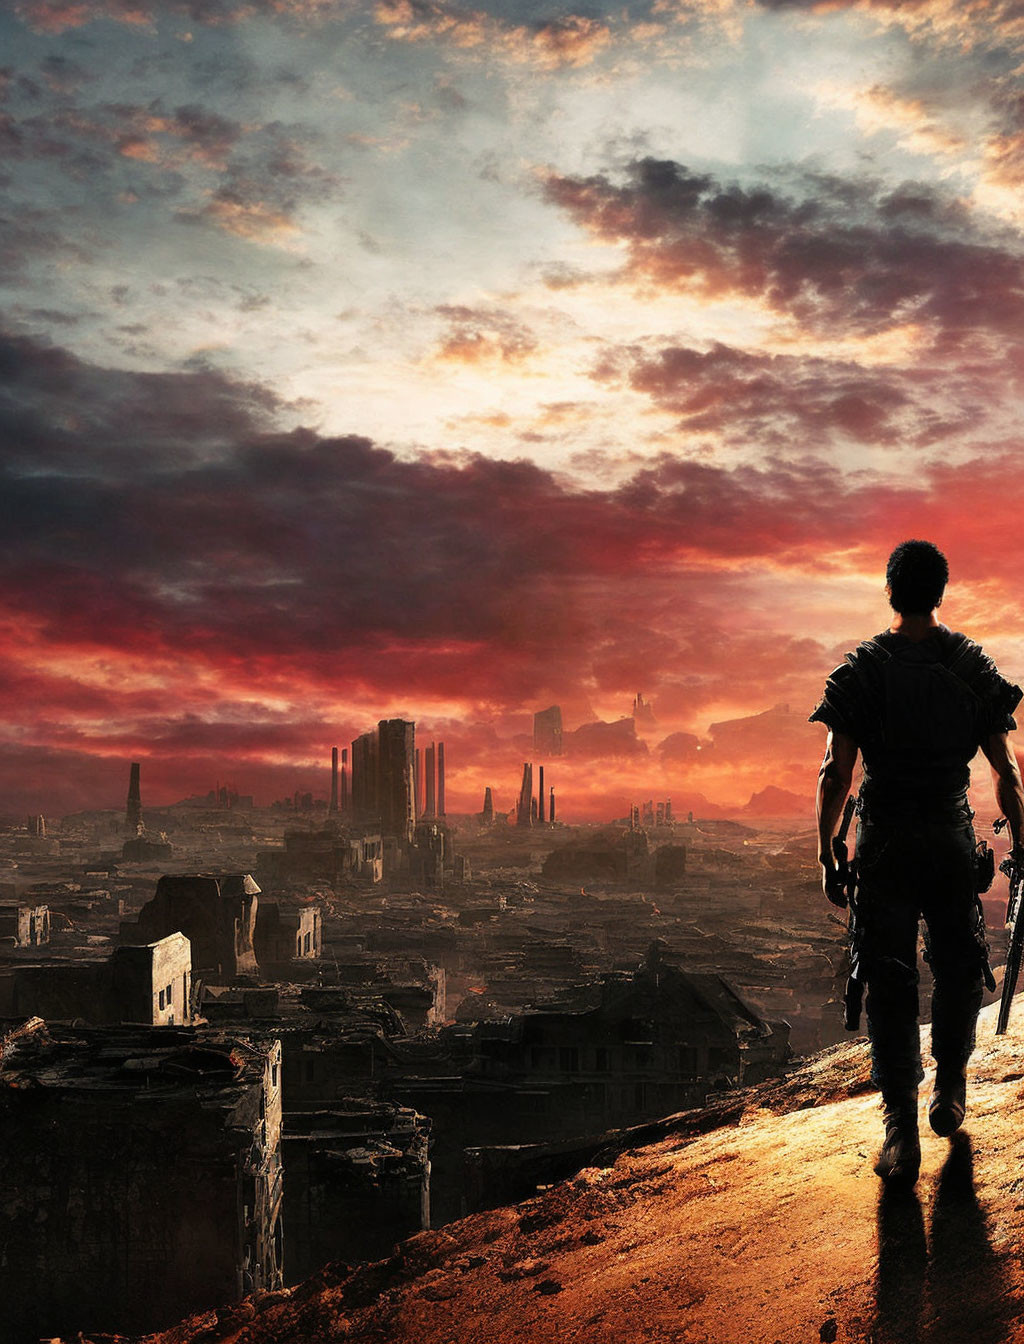 Figure with weapon approaches ruined city under red sky in post-apocalyptic scene